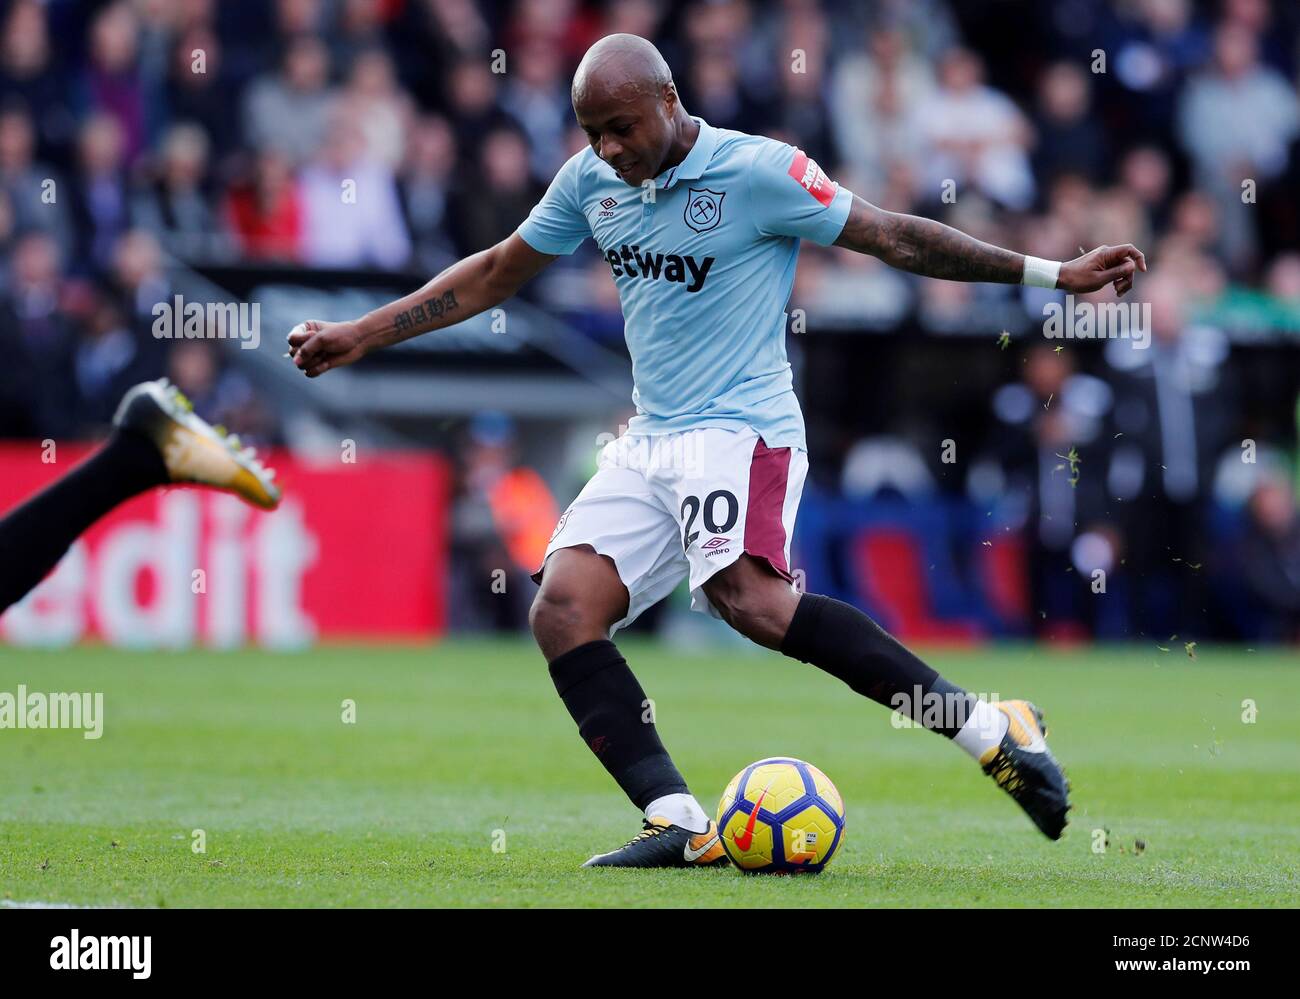 Soccer Football - Premier League - Crystal Palace vs West Ham United - Selhurst Park, London, Britain - October 28, 2017   West Ham United's Andre Ayew scores their second goal    REUTERS/Eddie Keogh    EDITORIAL USE ONLY. No use with unauthorized audio, video, data, fixture lists, club/league logos or 'live' services. Online in-match use limited to 75 images, no video emulation. No use in betting, games or single club/league/player publications. Please contact your account representative for further details.? Stock Photo